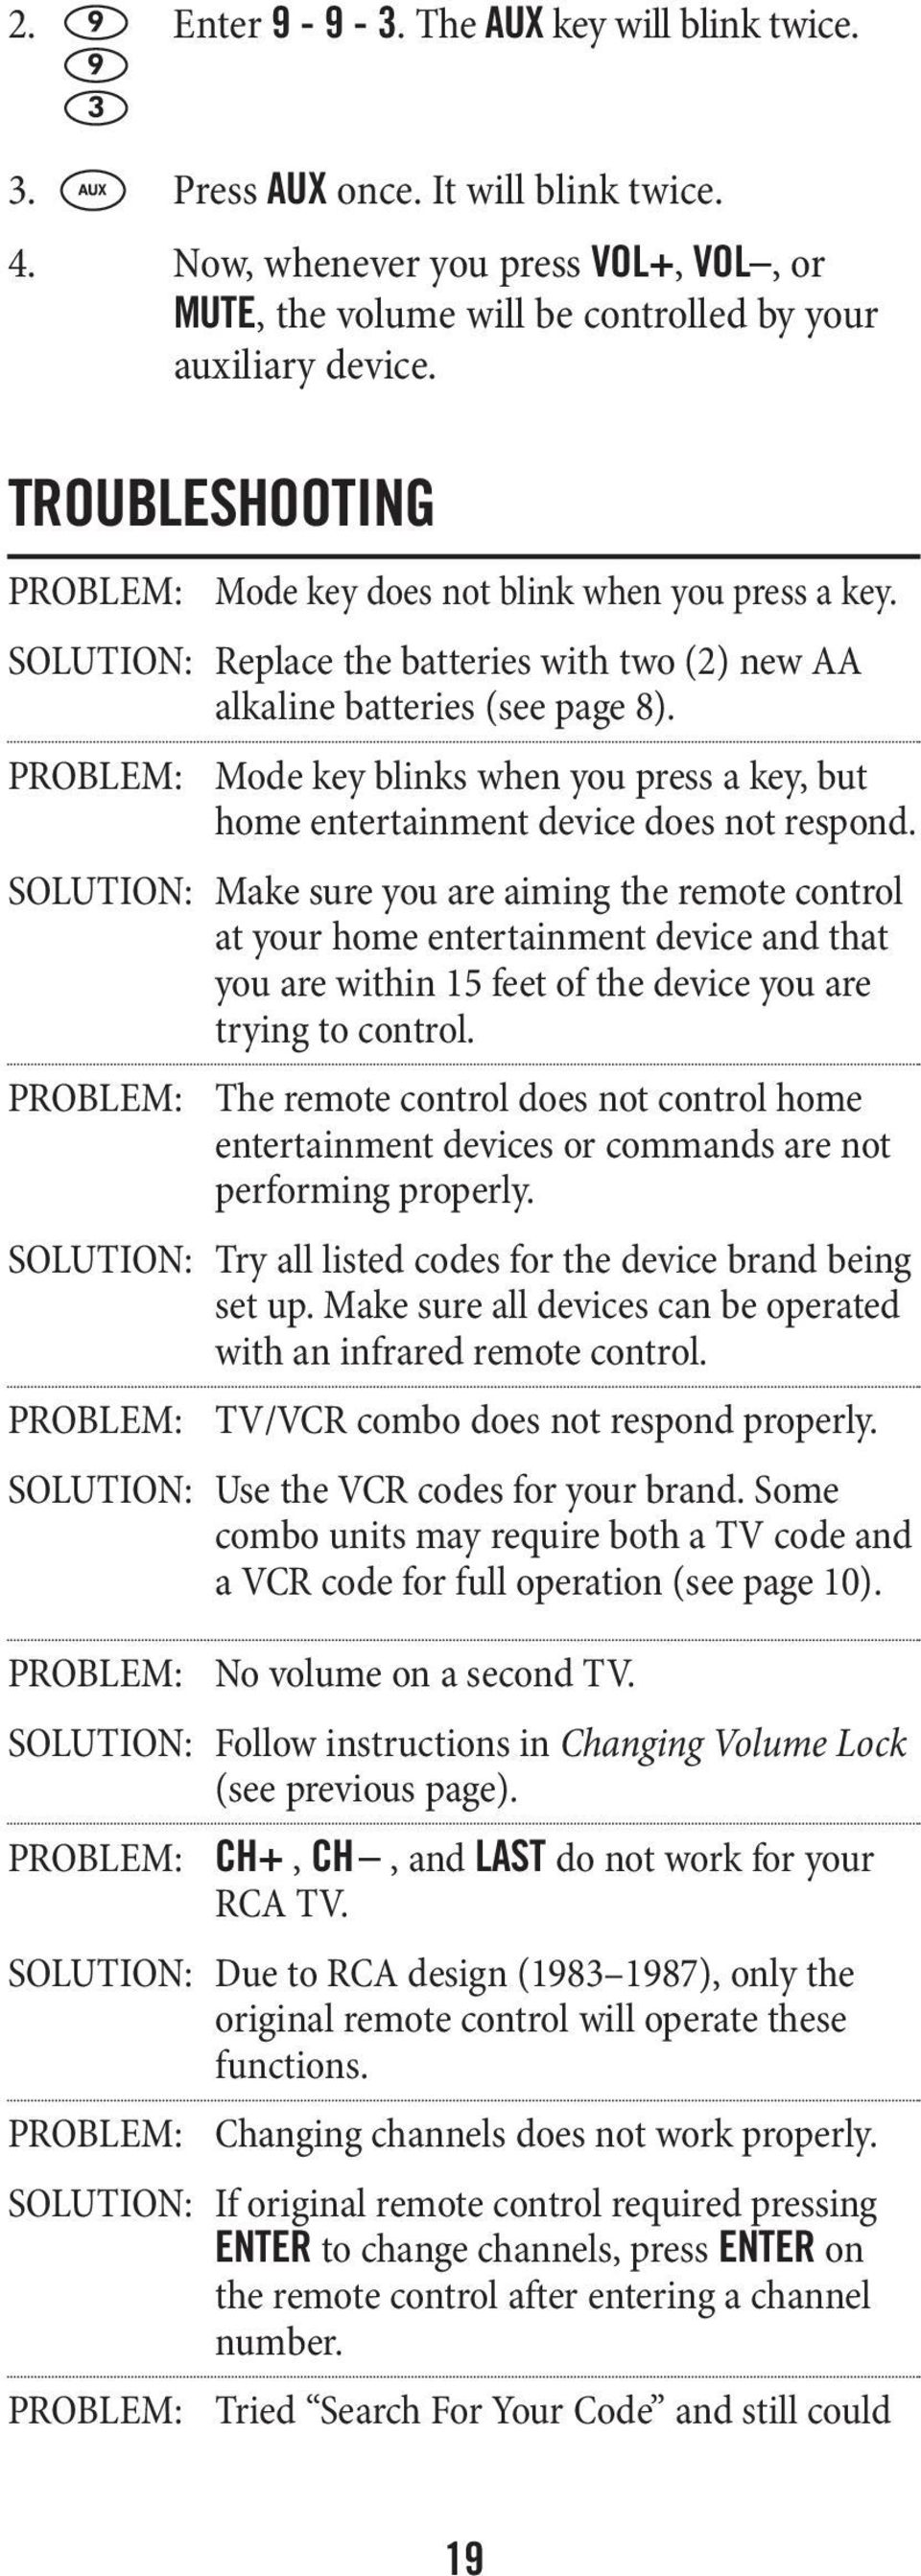 PROBLEM: Mode key blinks when you press a key, but home entertainment device does not respond.